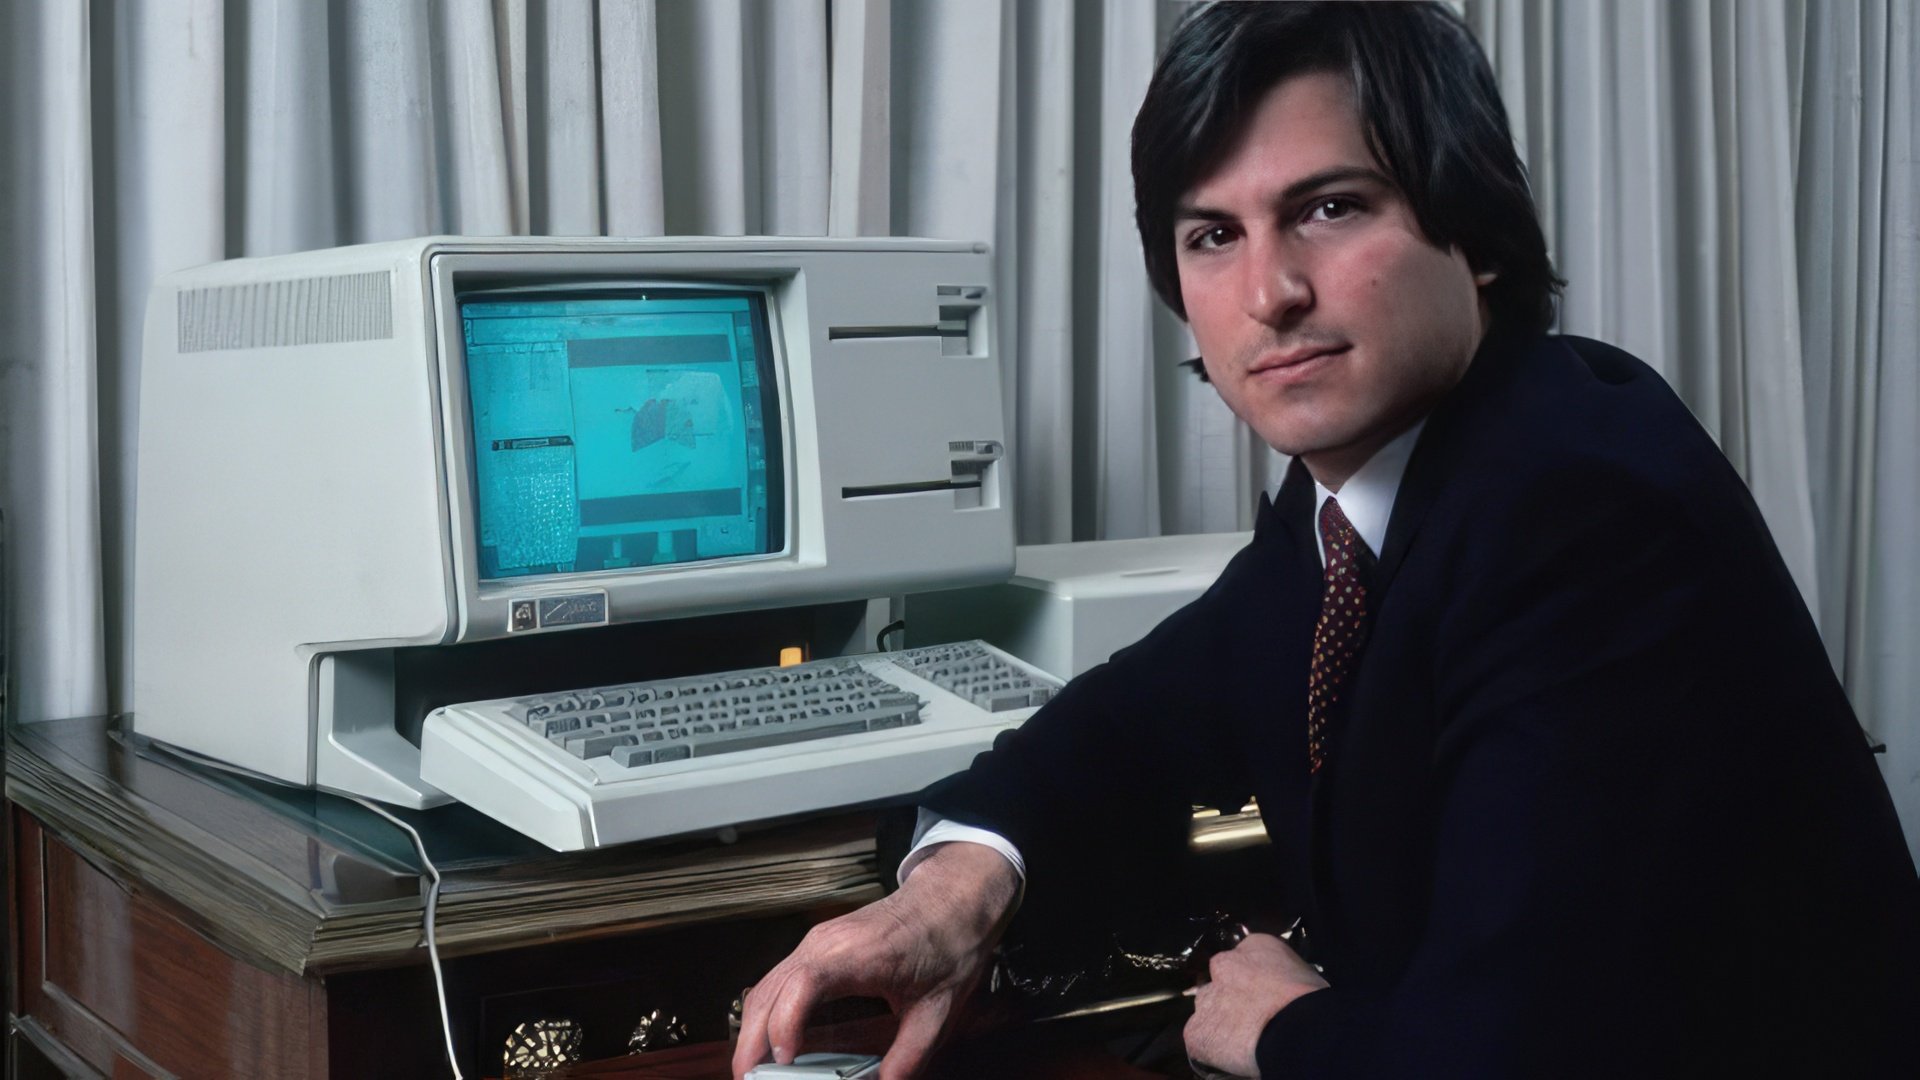 By the age of 25, Steve Jobs became a millionaire